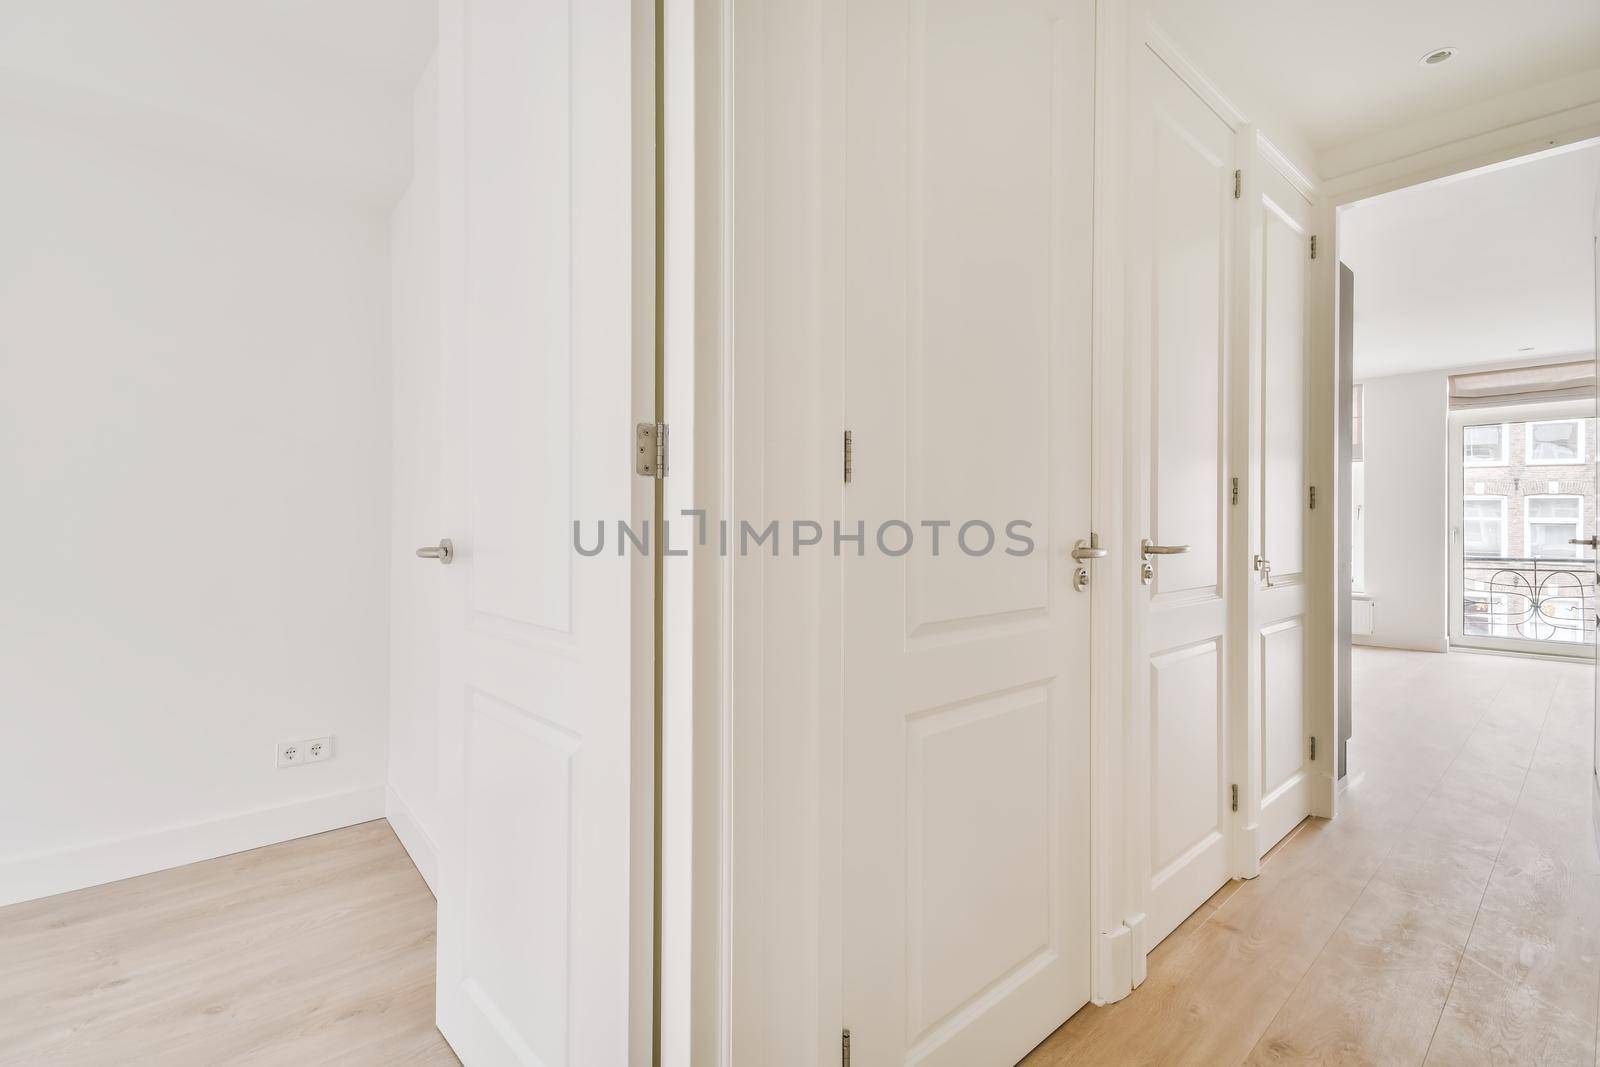 A perspective view of an empty narrow hallway with white walls and parquet floors in a minimalist apartment.